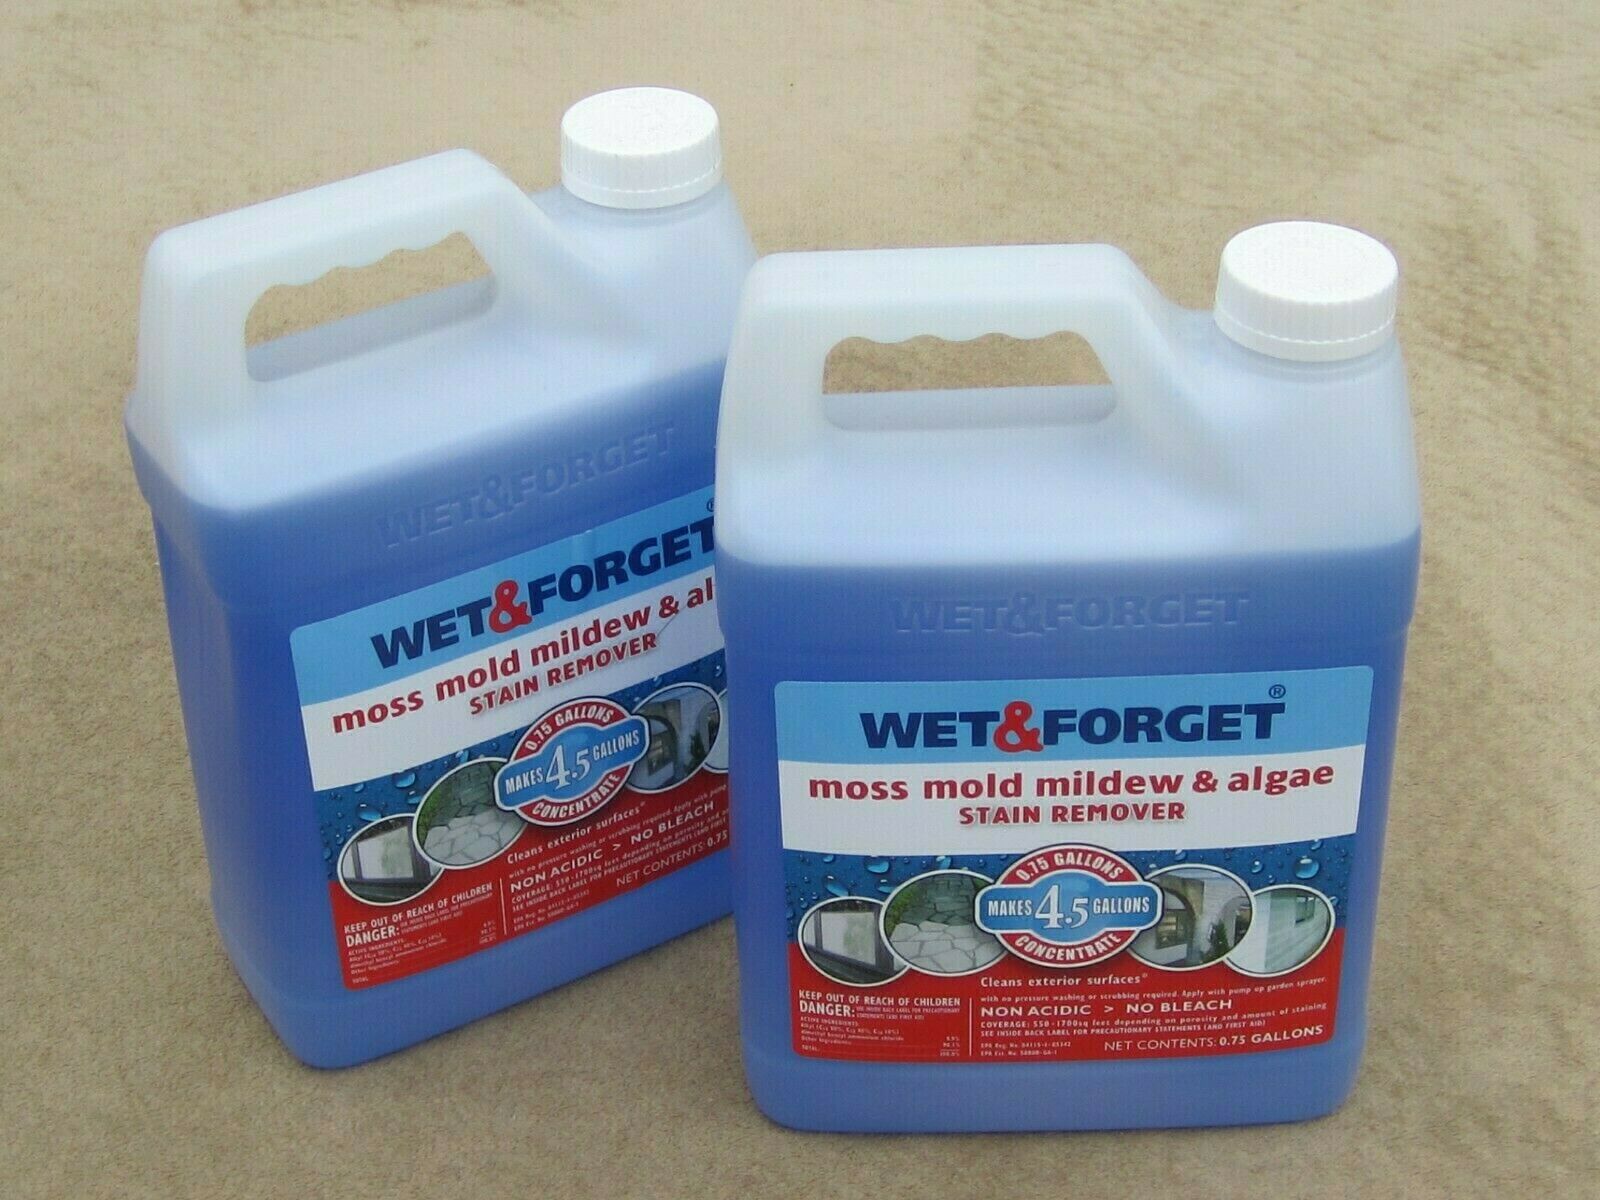 (2) Wet & Forget Moss Mold Mildew & Algae Stain Remover - New